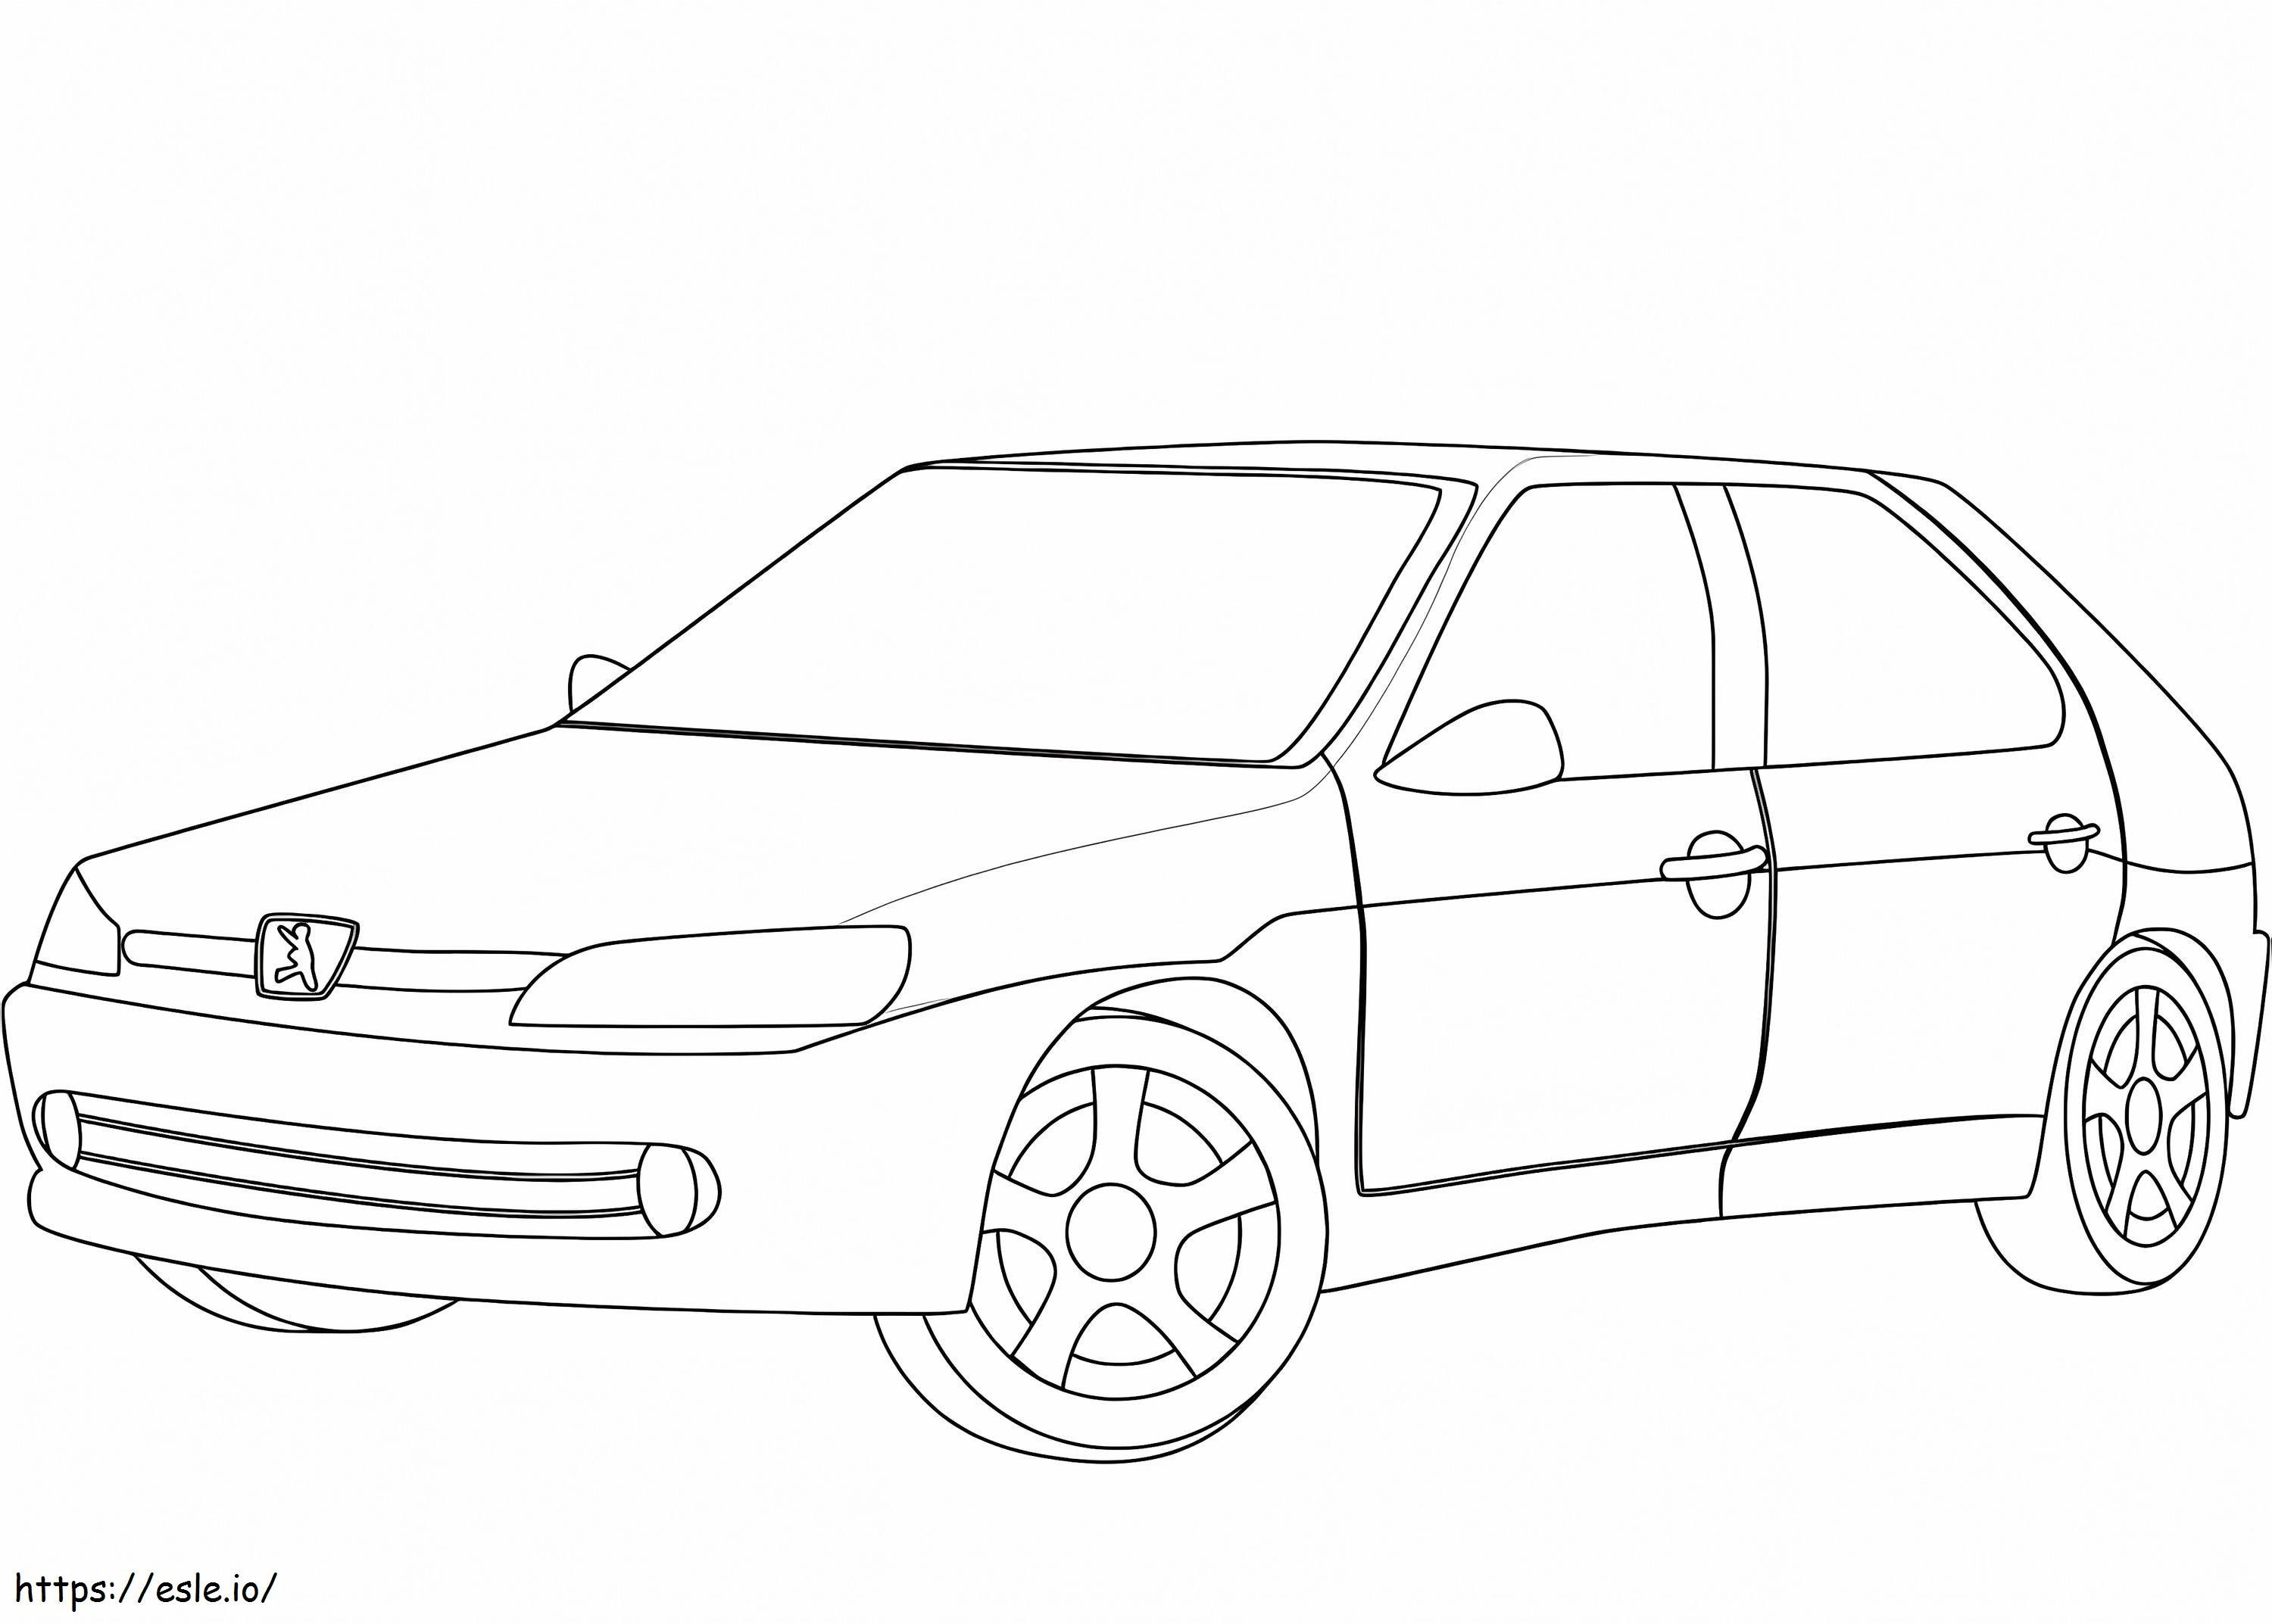 Peugeot 306 coloring page